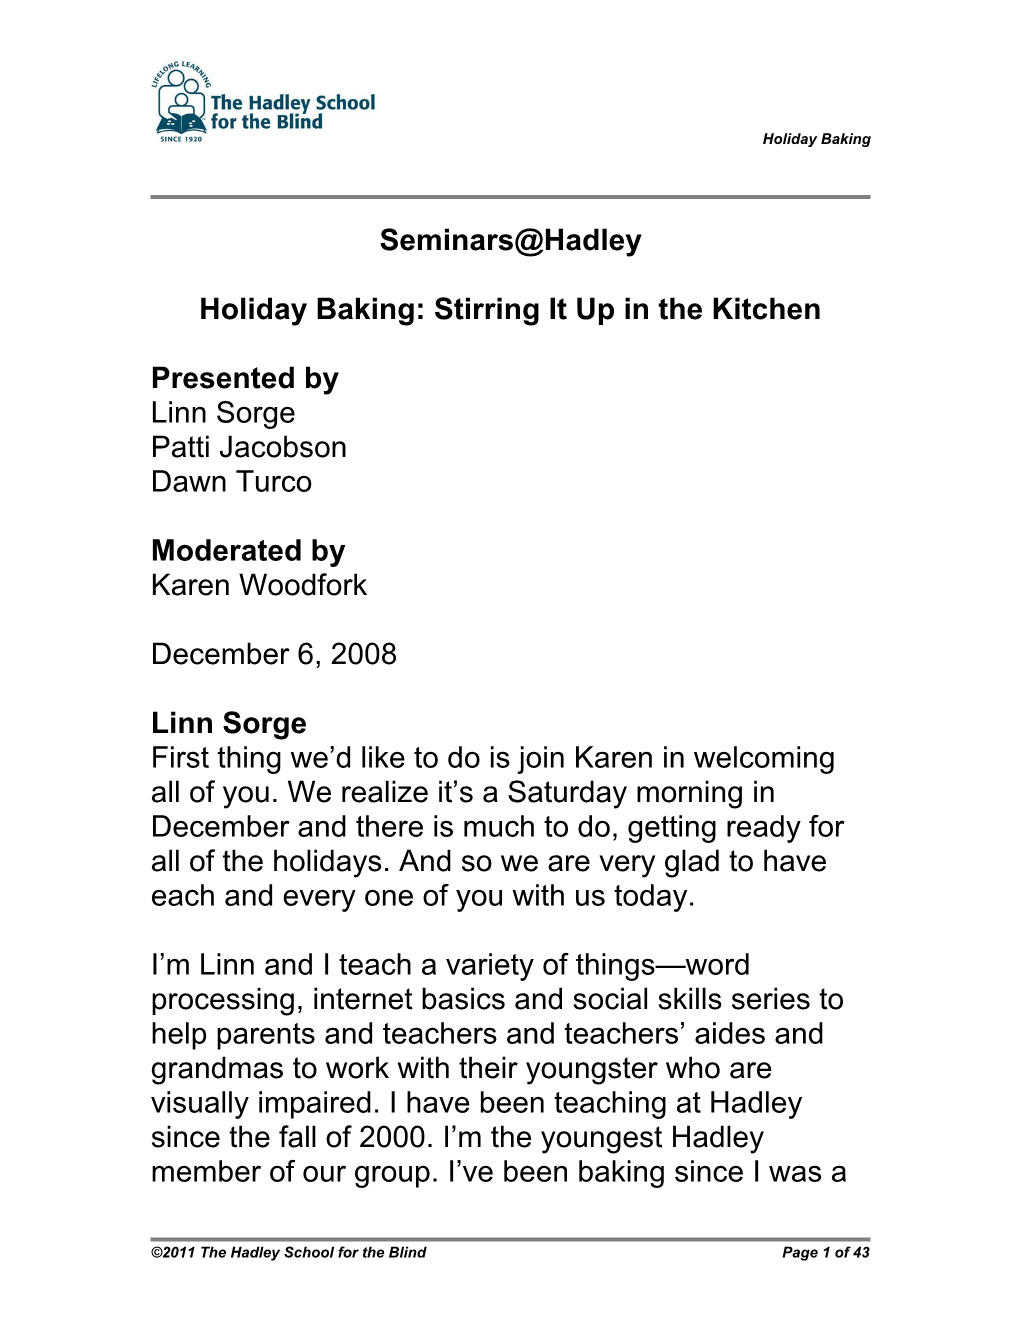 Holiday Baking: Stirring It up in the Kitchen